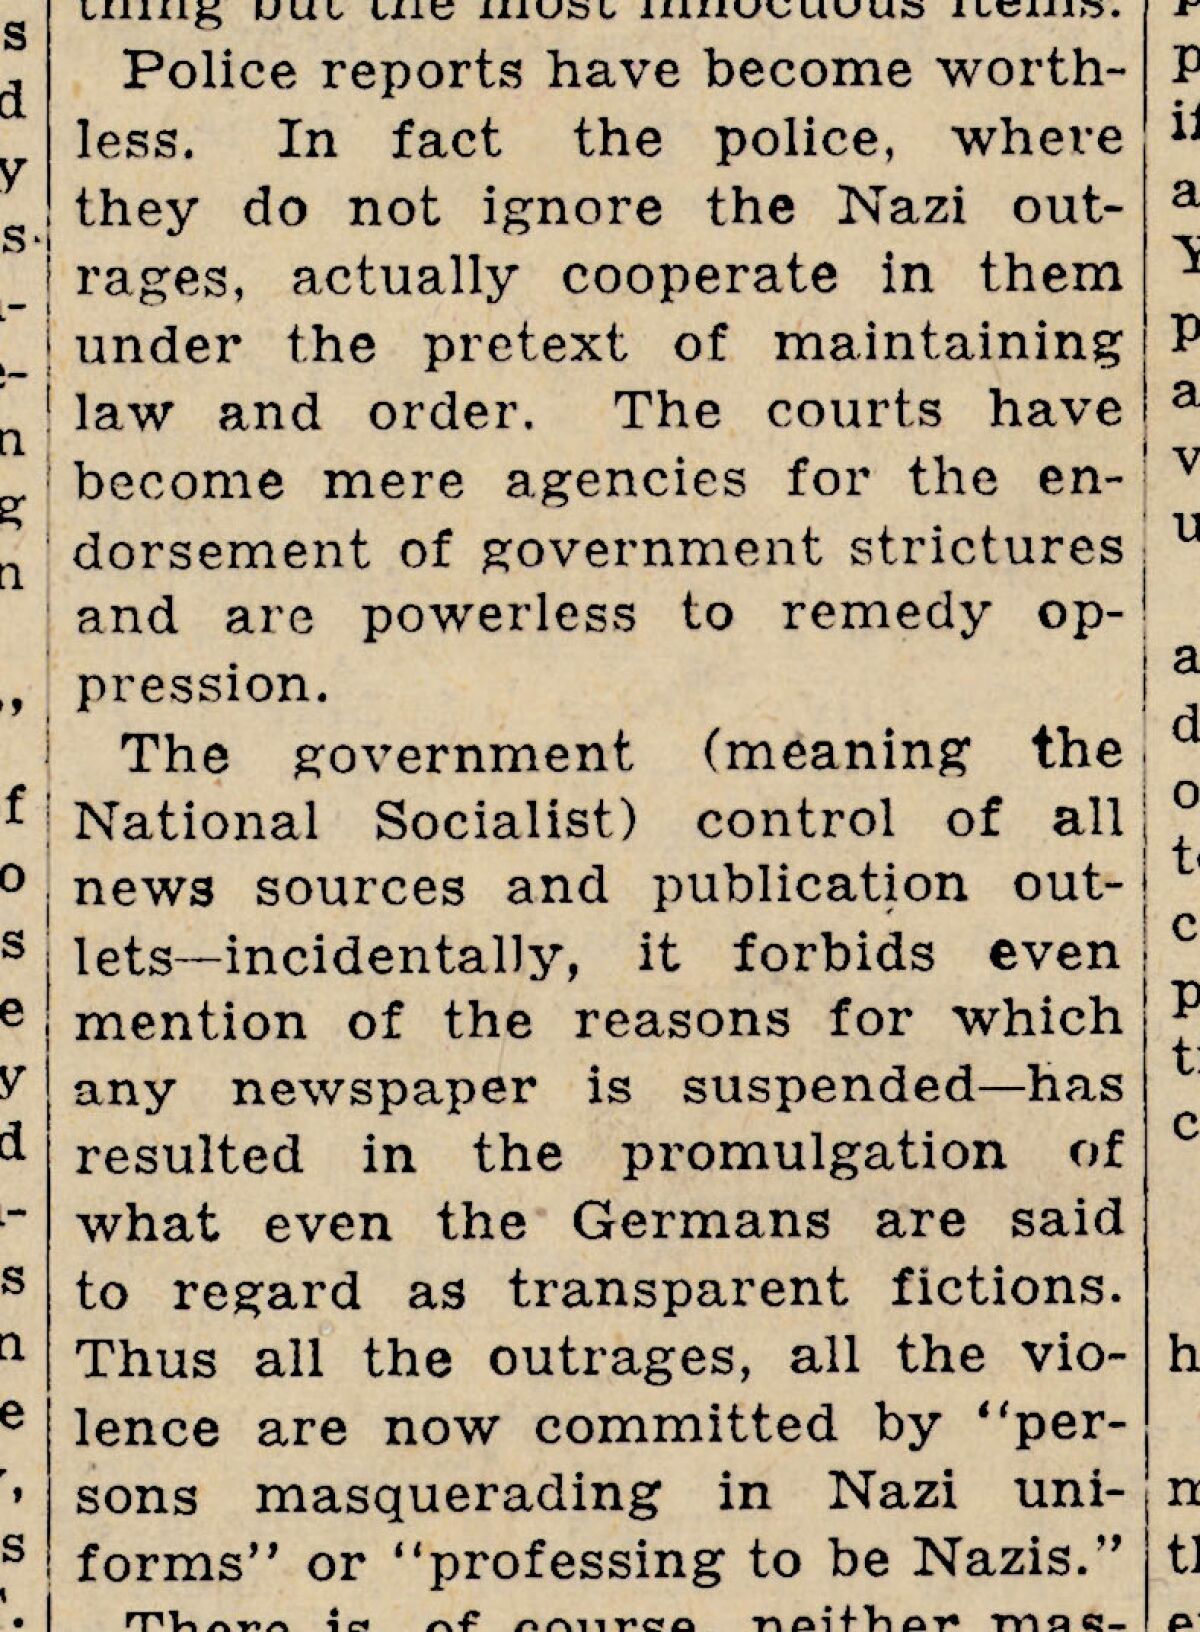 An excerpt of a 1933 news report on yellowed newsprint addresses suppression of the press